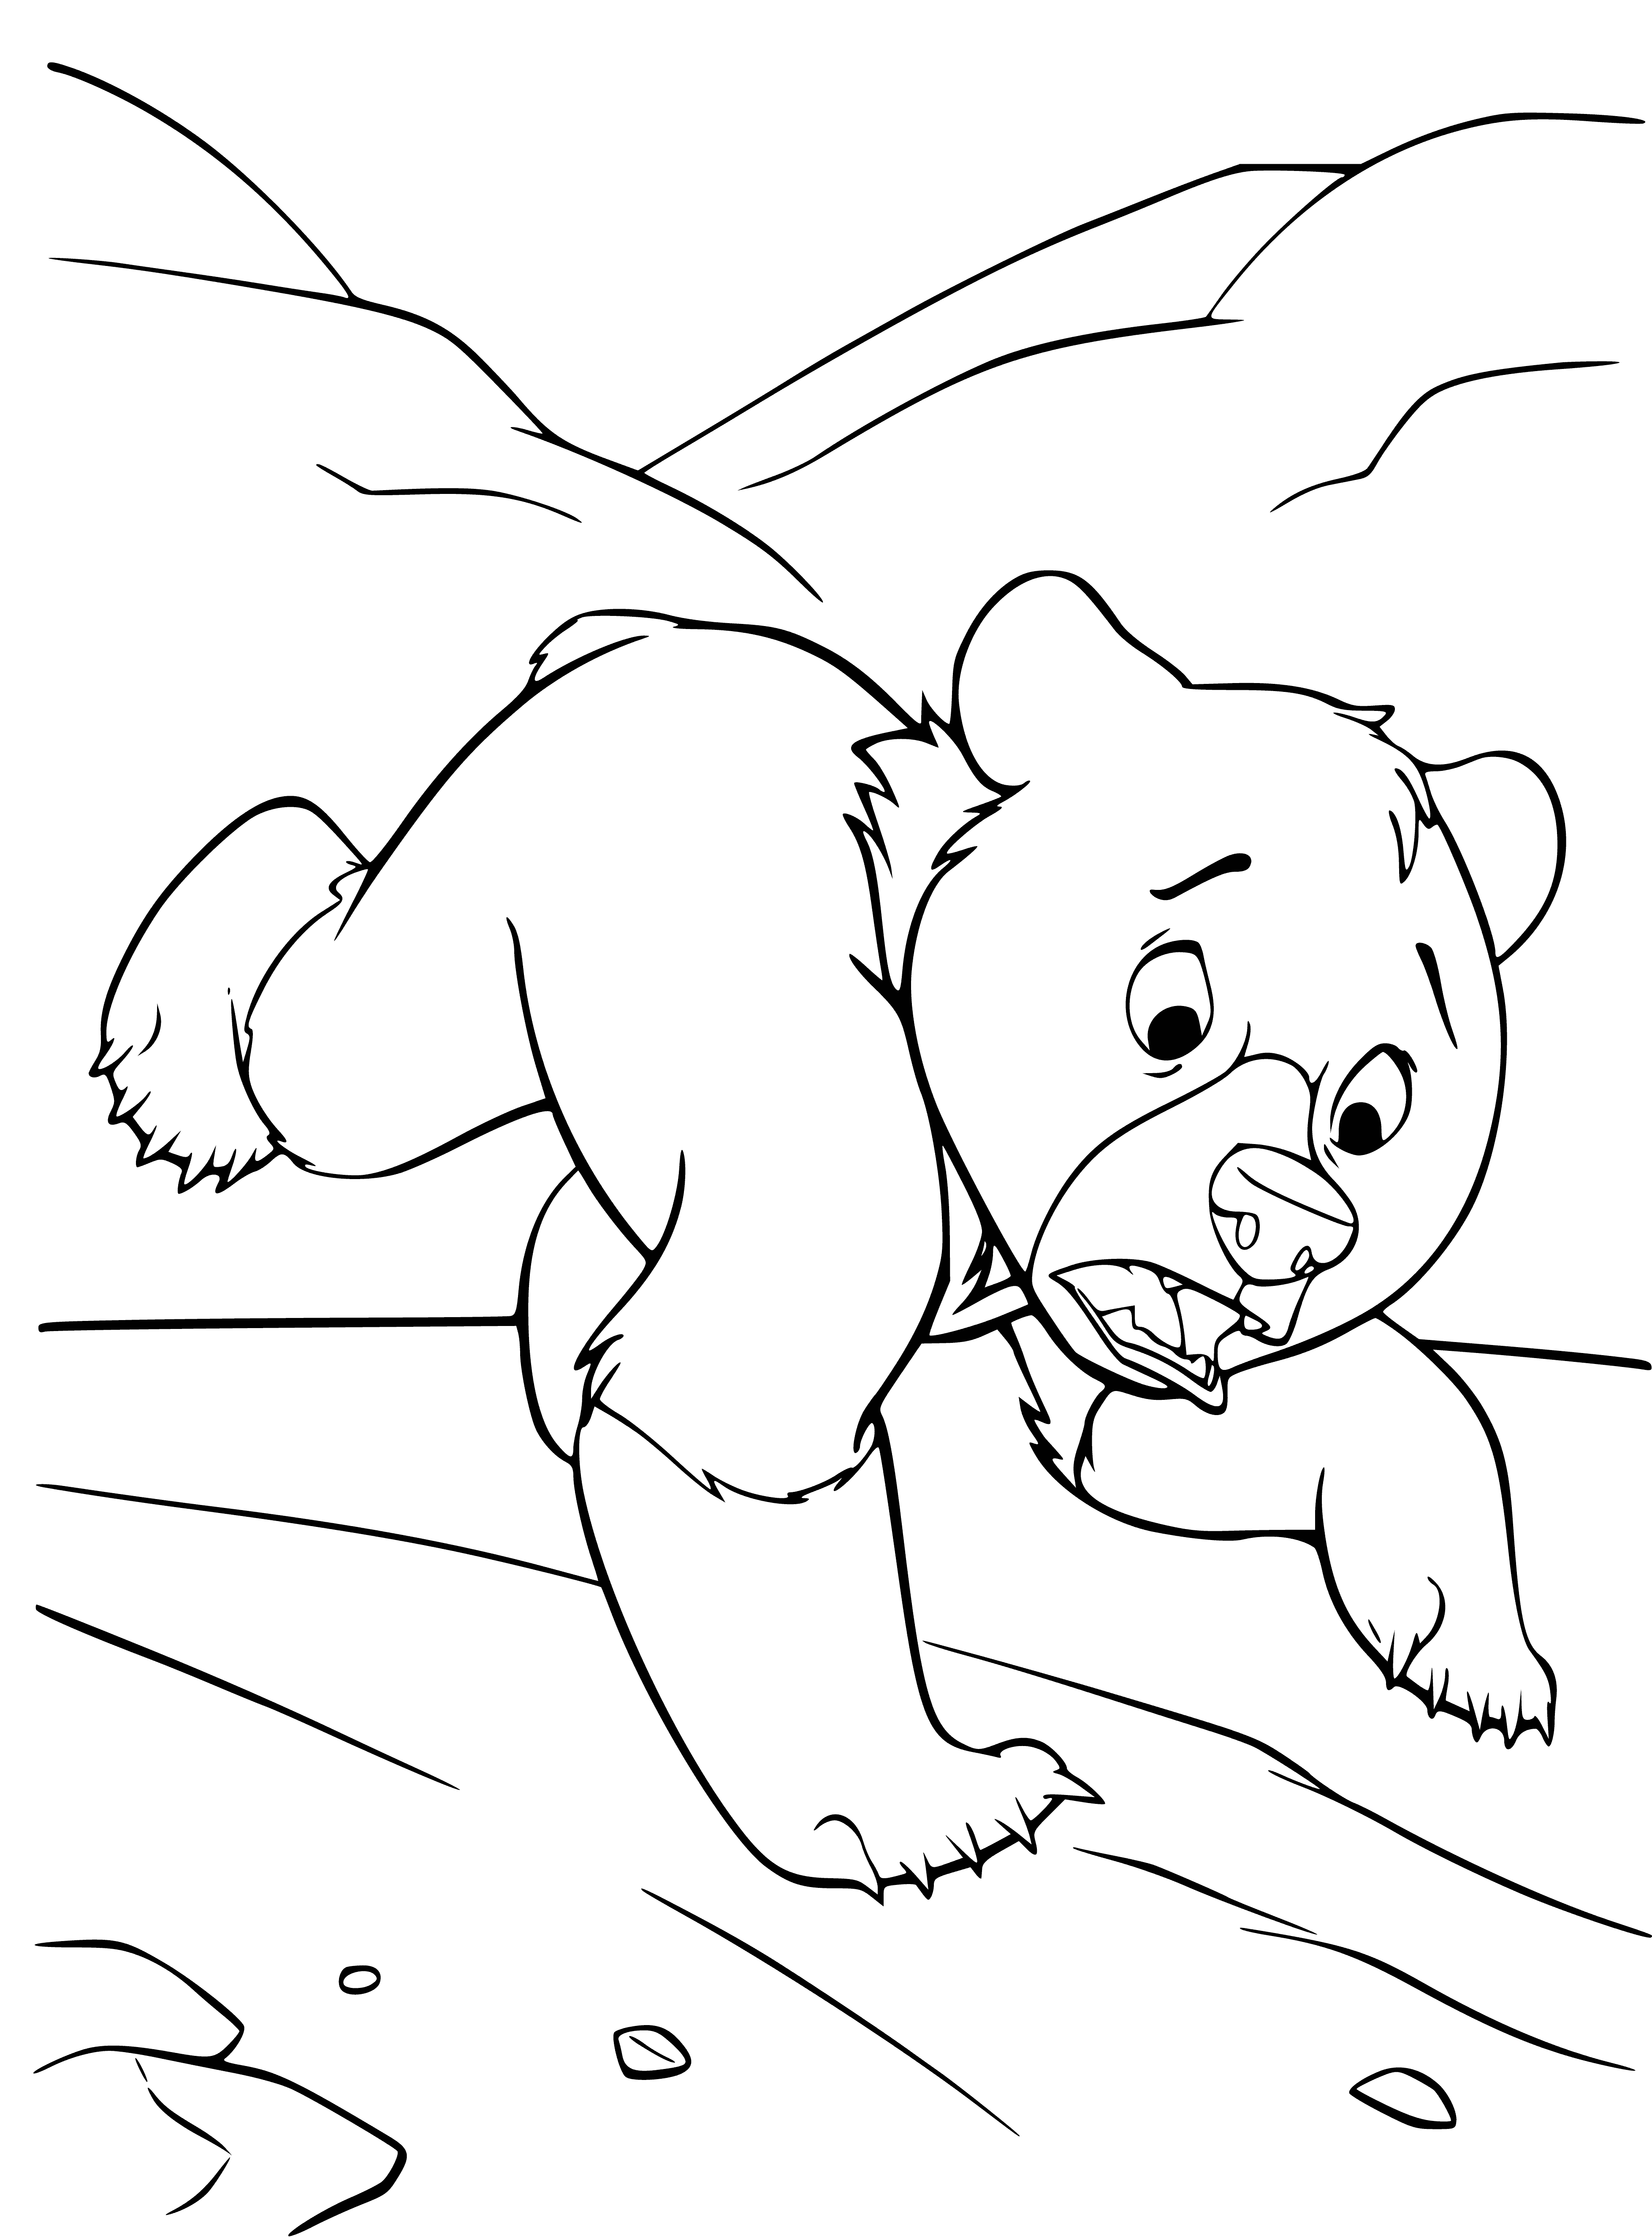 Code coloring page